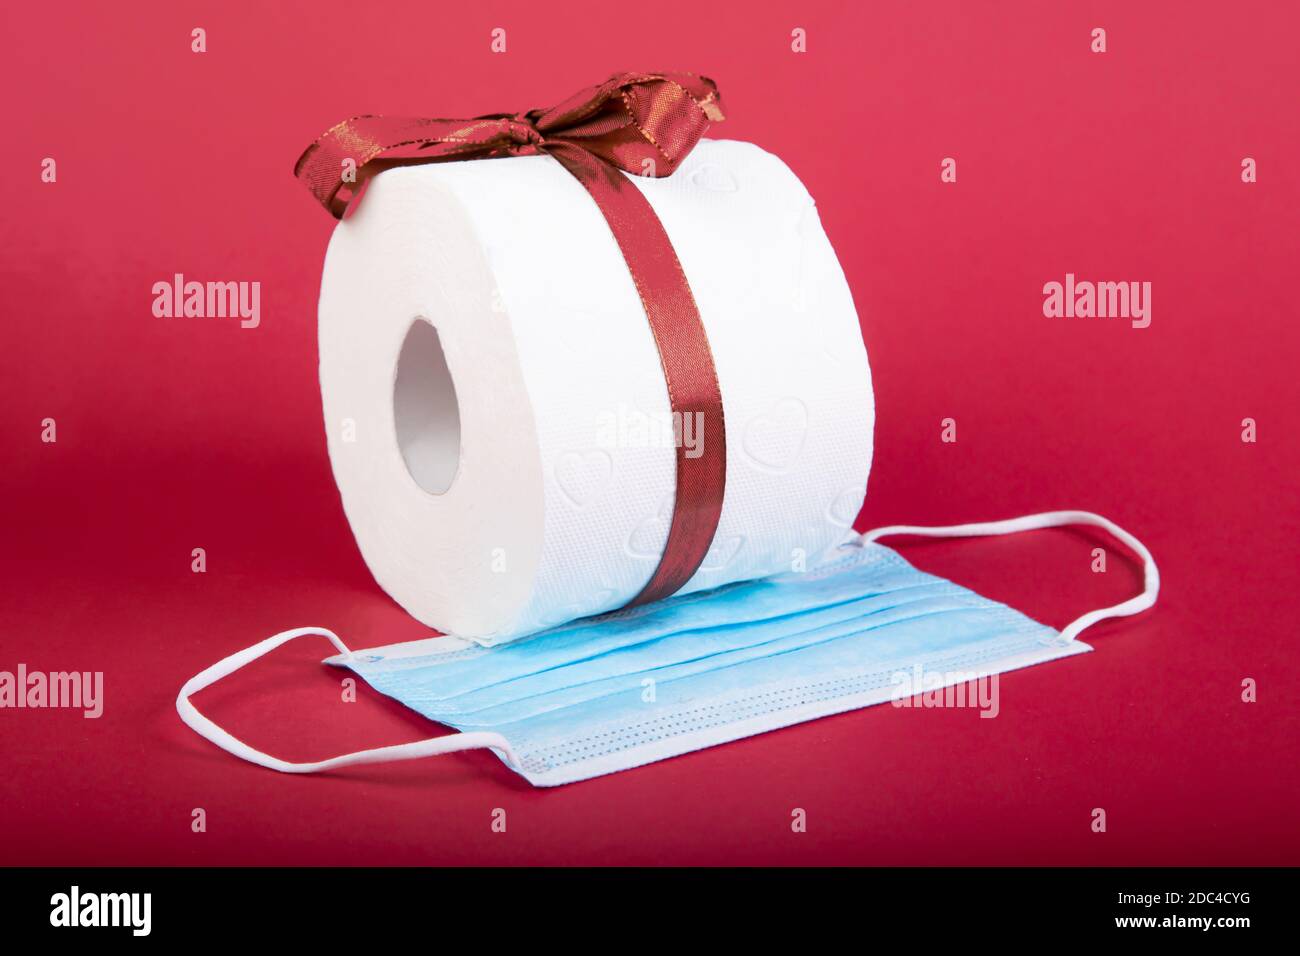 toilet paper roll with loop and a mouth protection mask as christmas present, red background Stock Photo